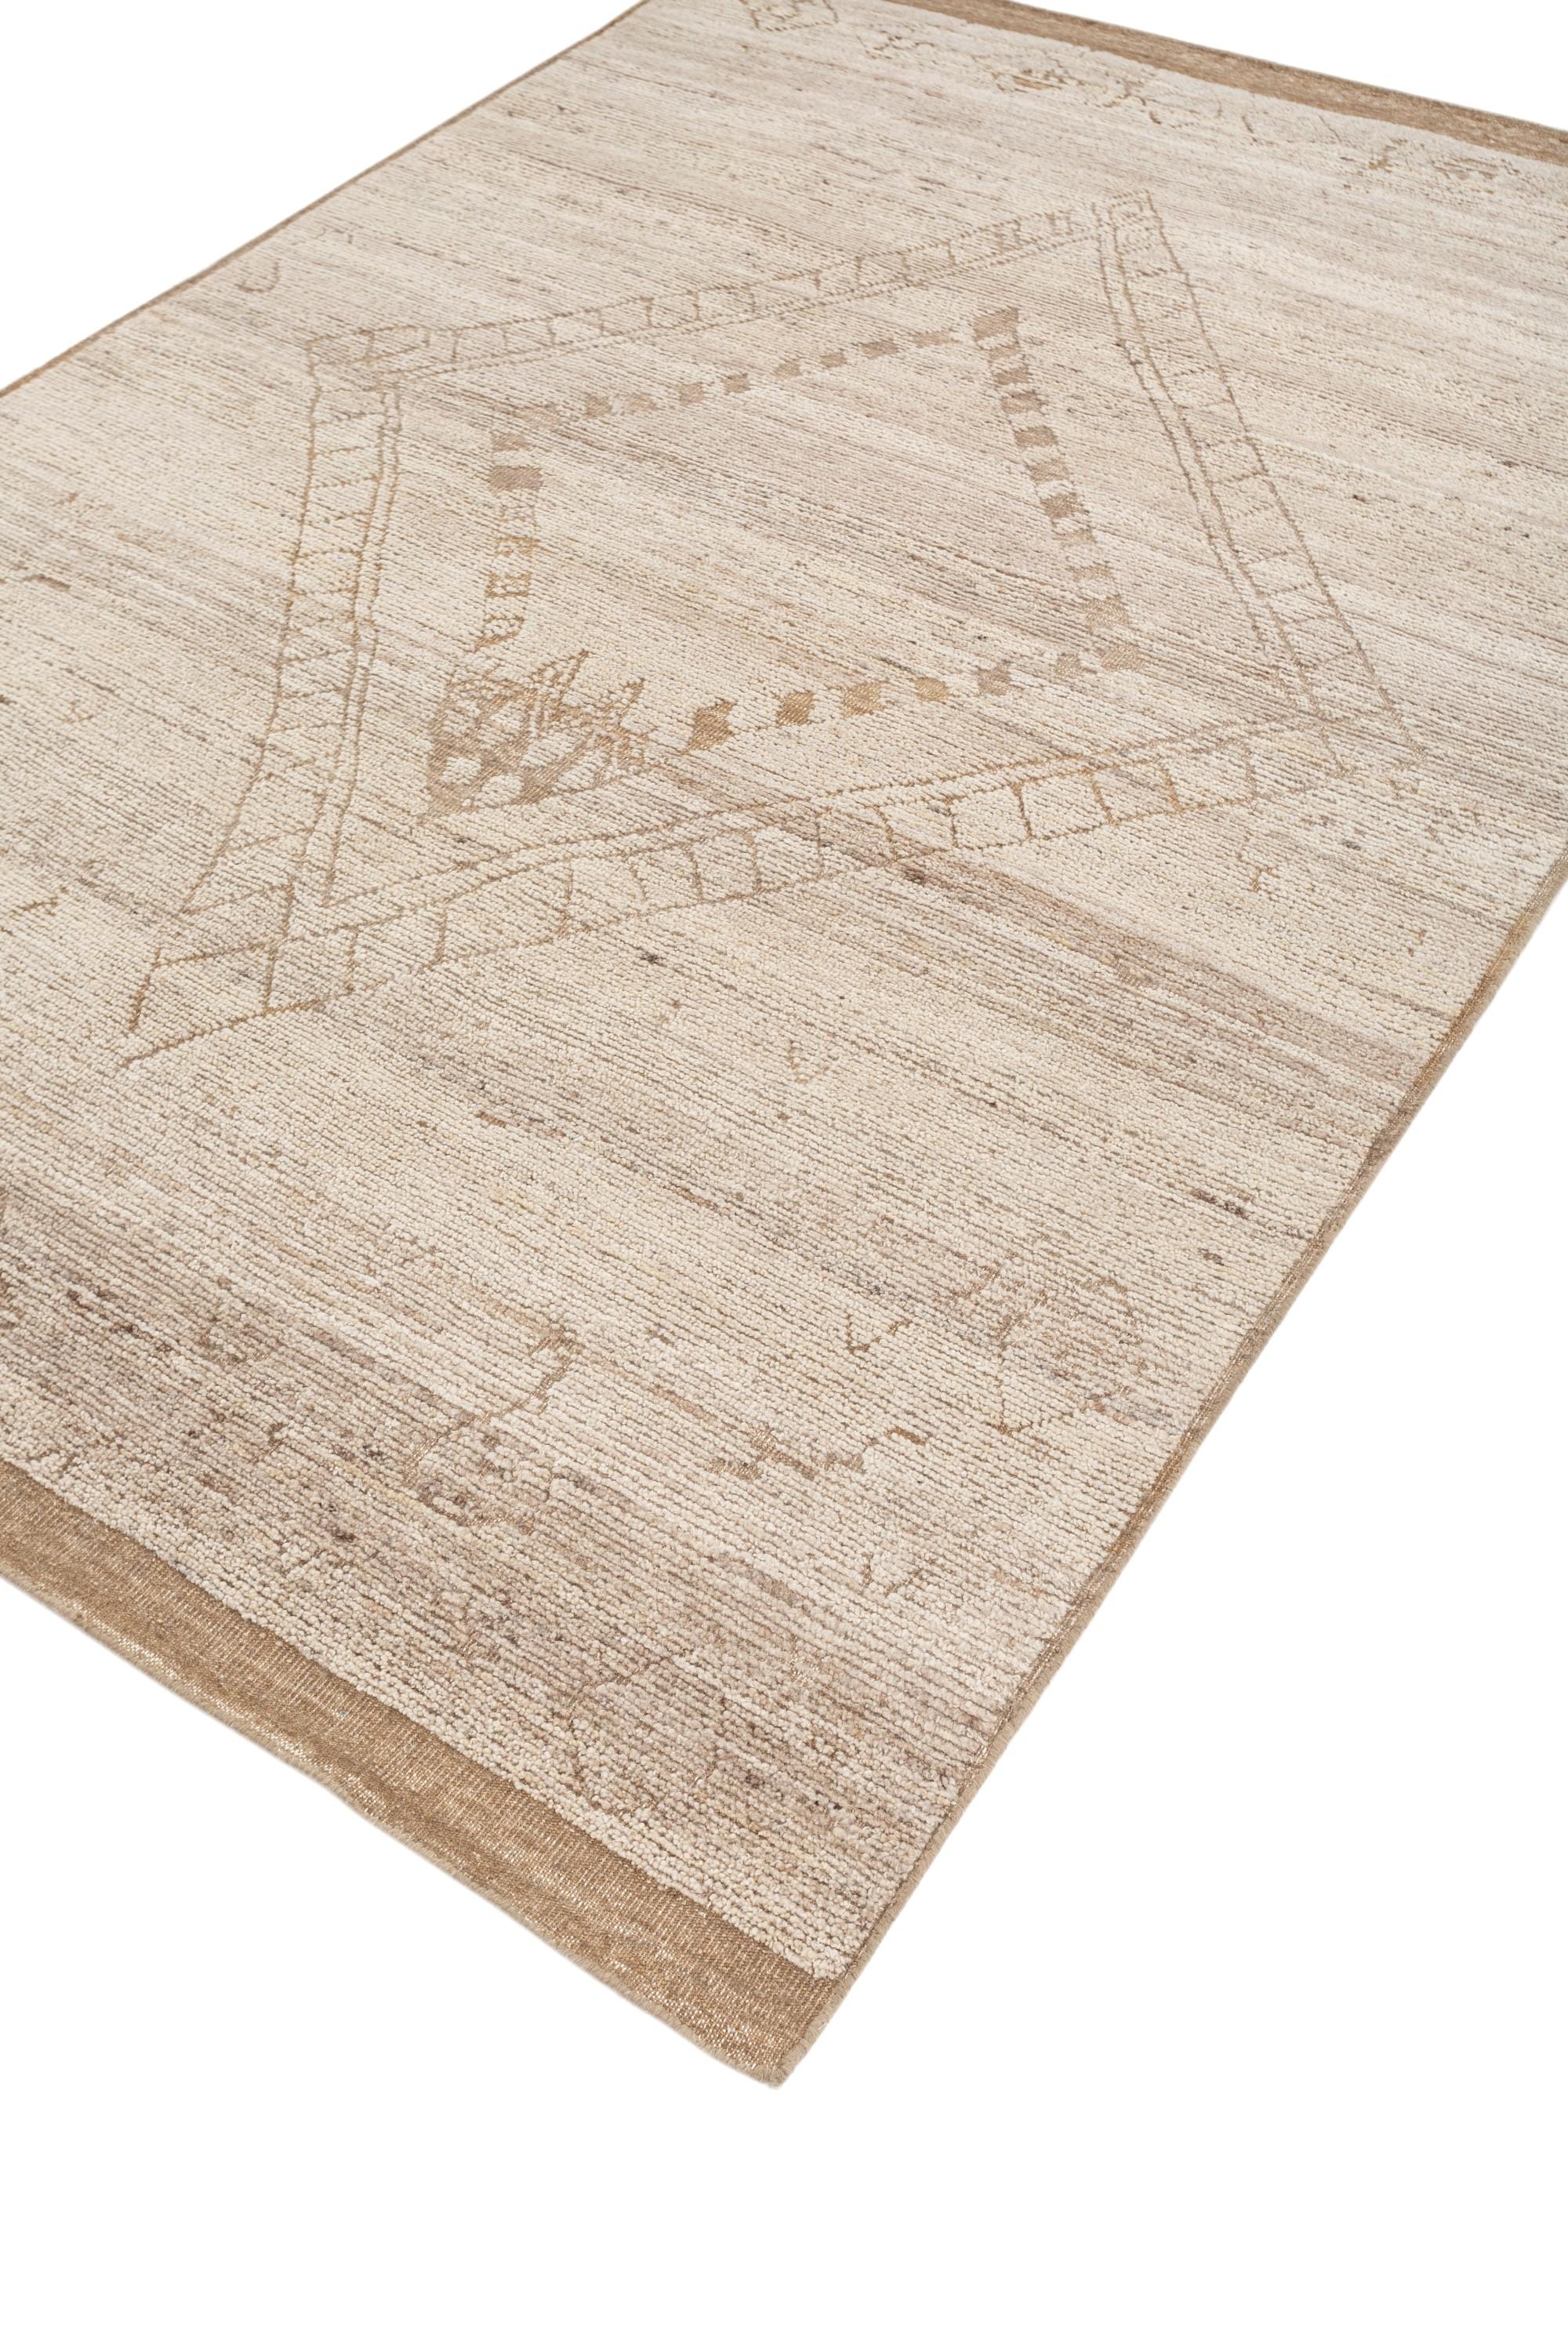 Country Ivory Frostfall White pepper & White pepper 180x270 cm Hand Knotted Rug For Sale